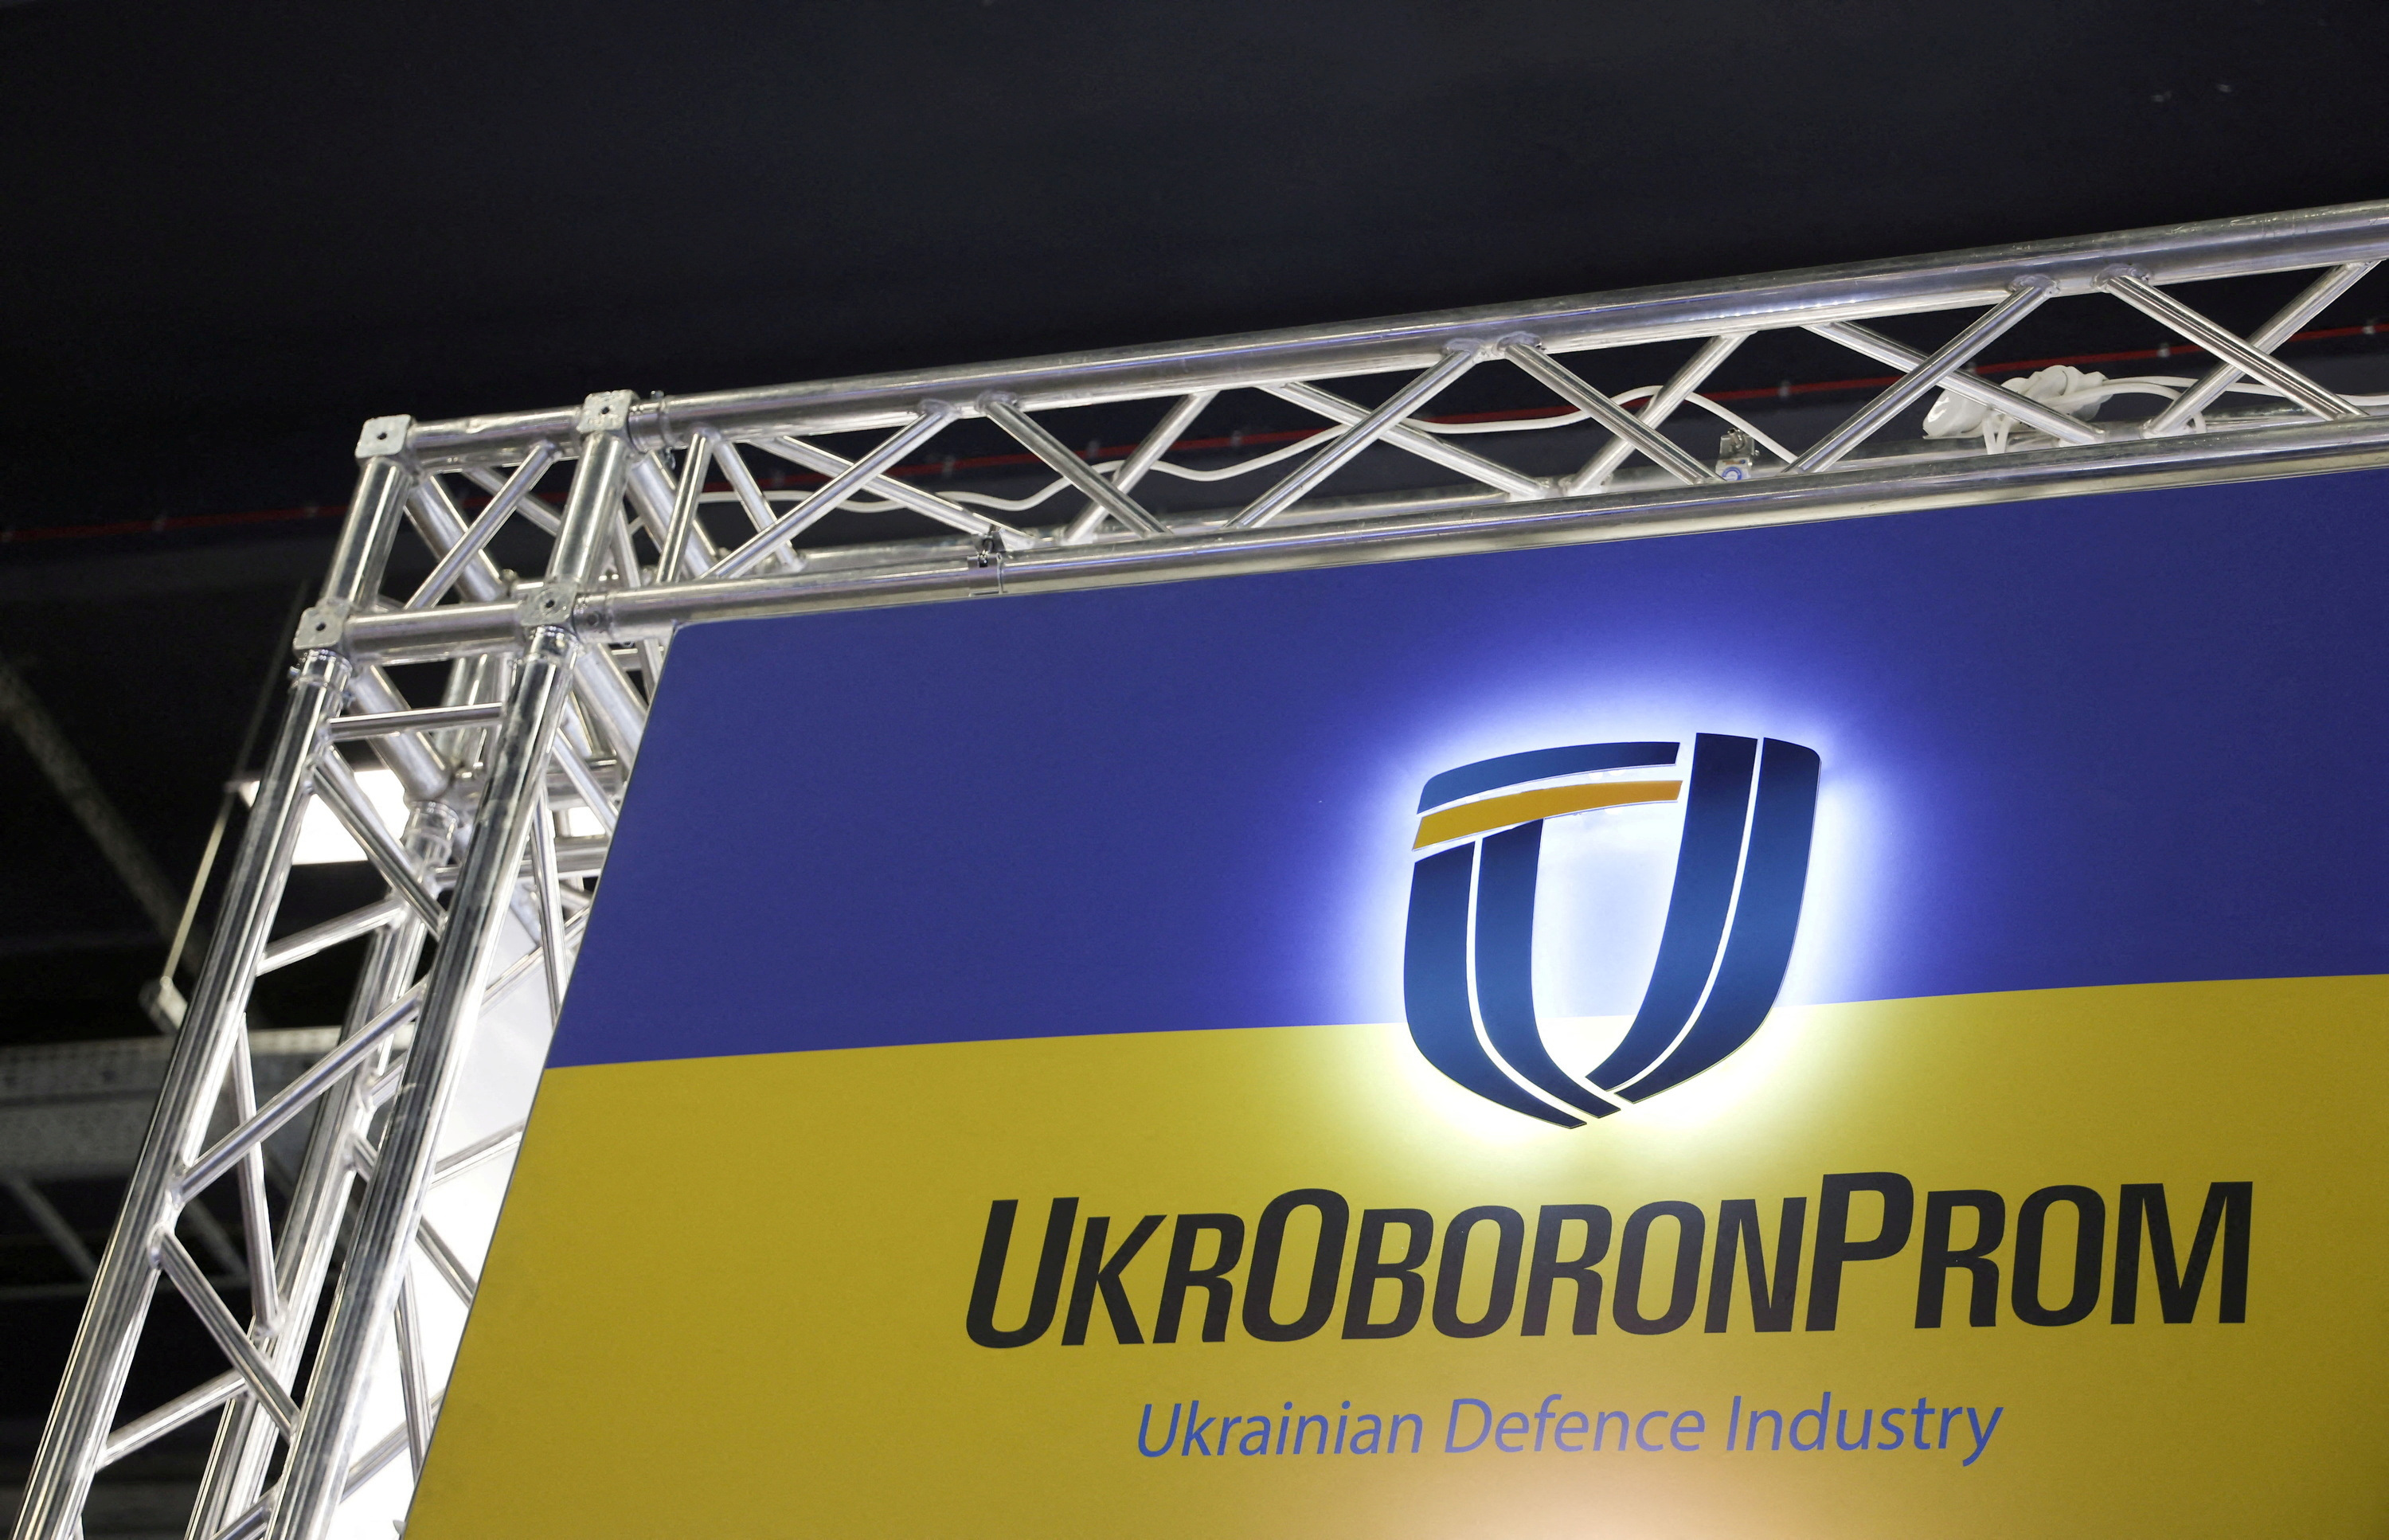 Ukrainian UkrOboronProm logo is pictured at their stand inside a hall of the 30th International Defence Industry Exhibition in Kielce